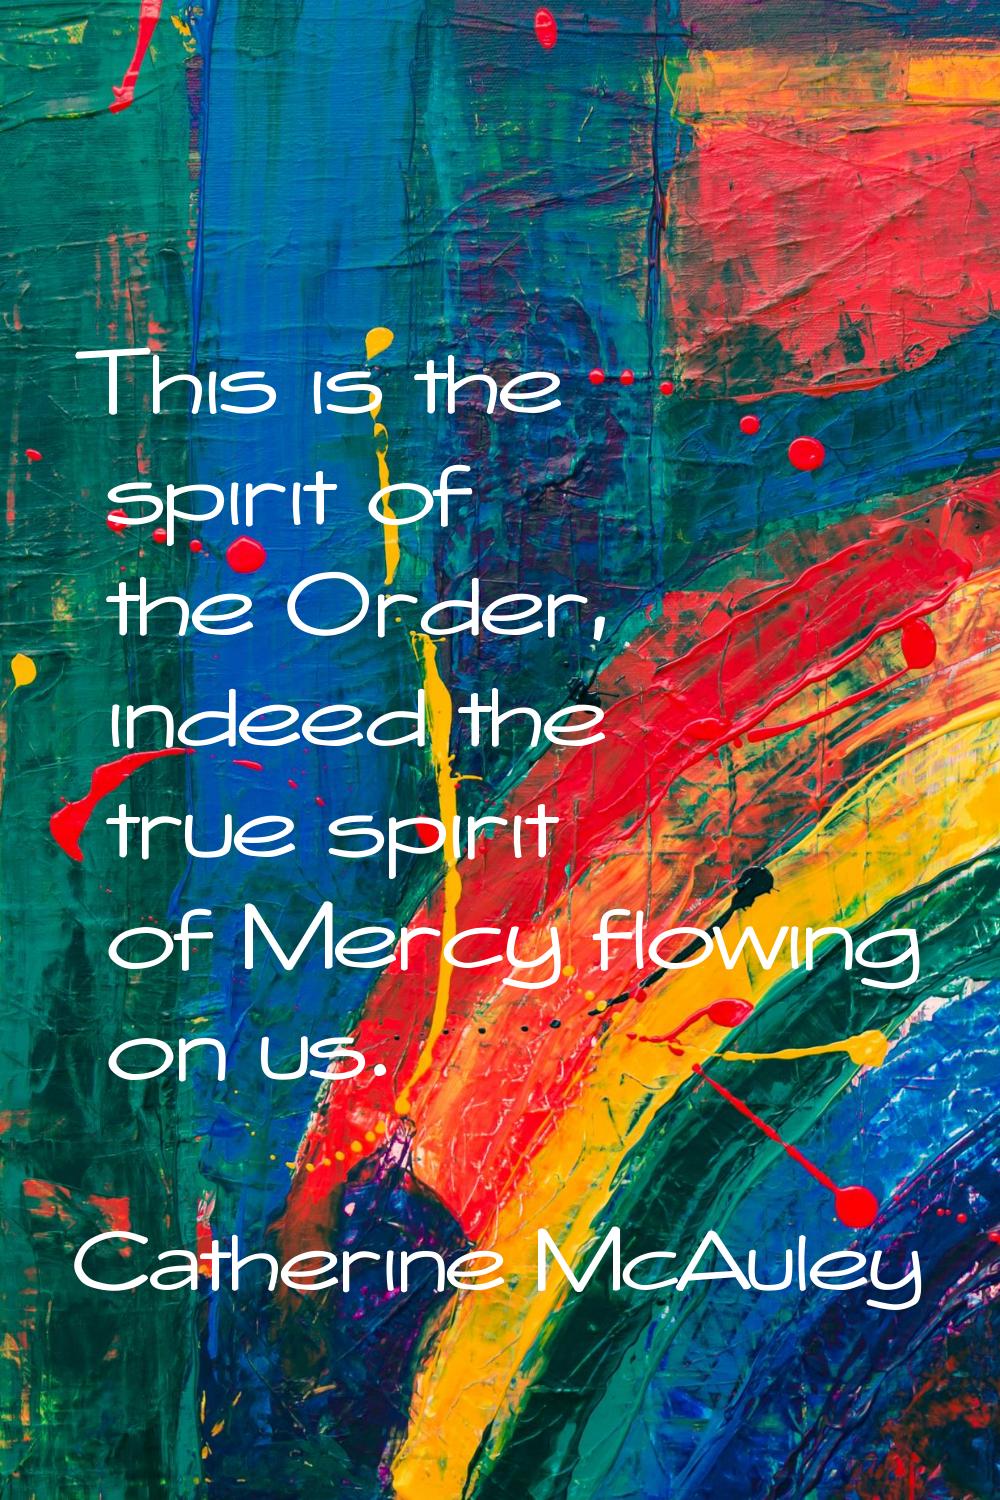 This is the spirit of the Order, indeed the true spirit of Mercy flowing on us.